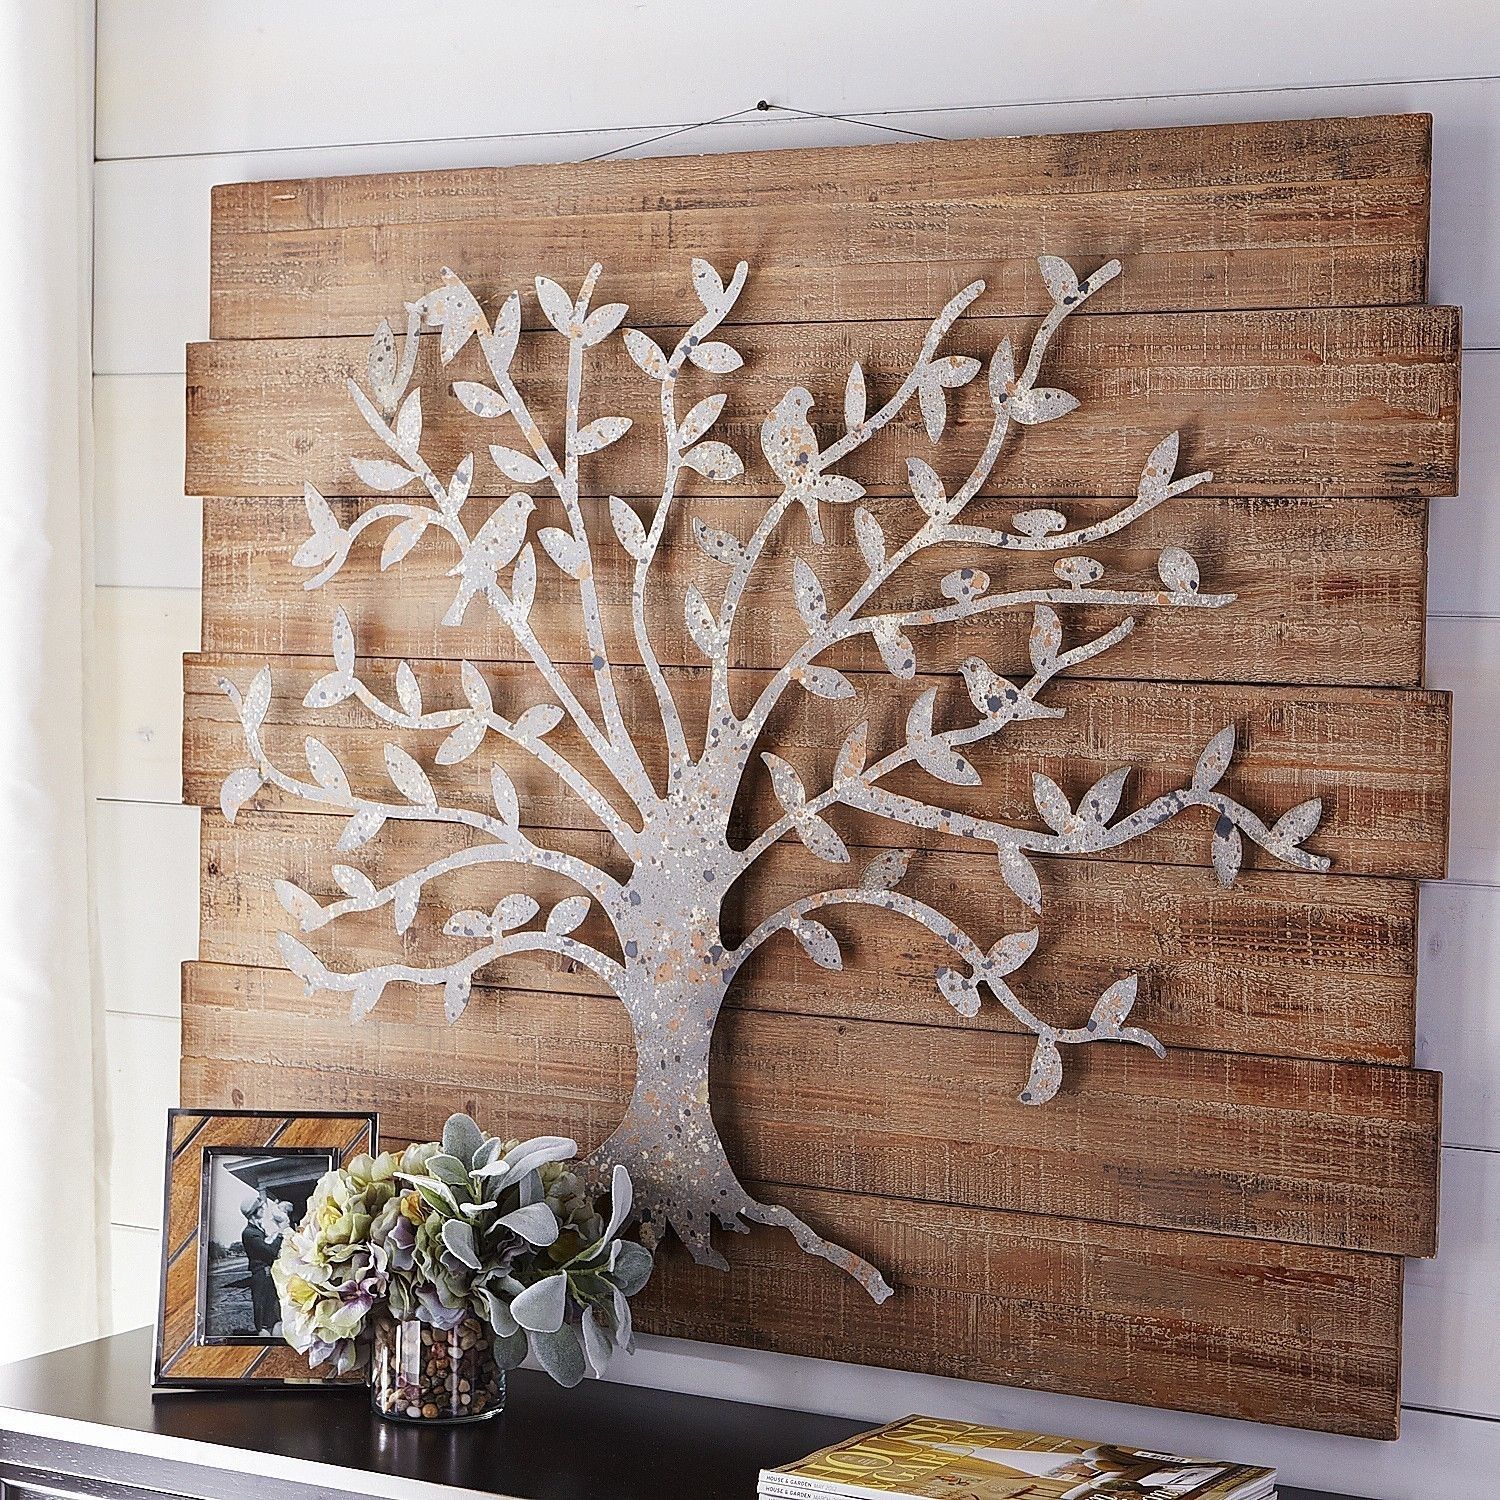 Timeless Tree Wall Decor | Pier 1 Imports … | Metal Work | Pinte… For Wall Art (Photo 5 of 20)